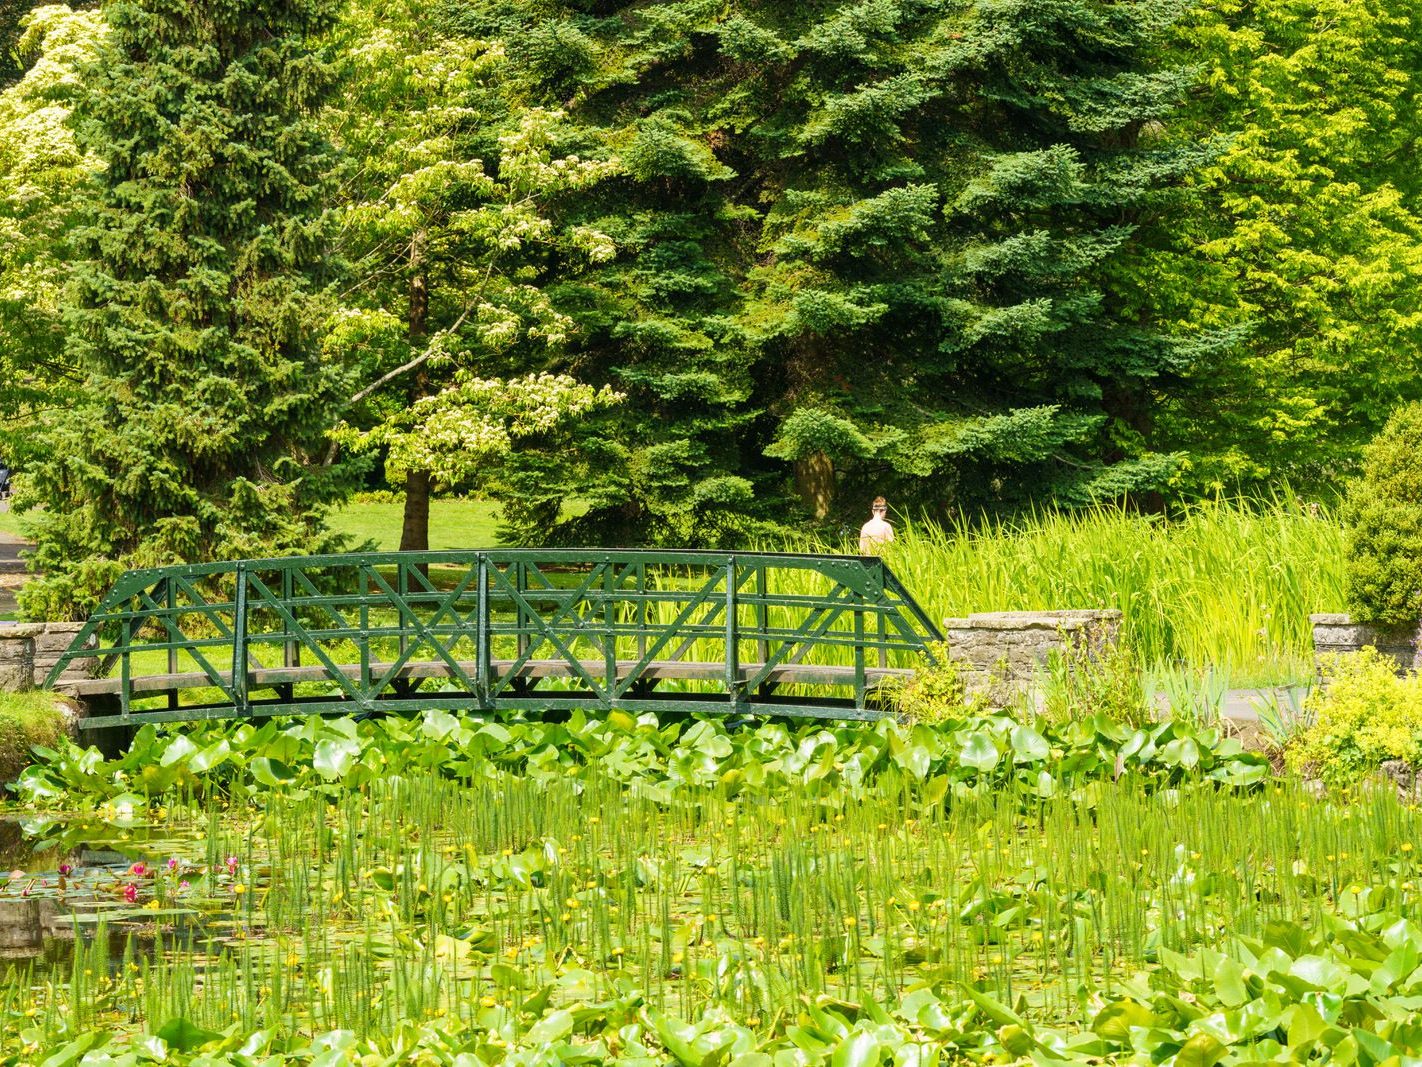 THE SMALL FOOTBRIDGE [ACROSS THE LILY POND AT THE BOTANIC GARDENS] 005